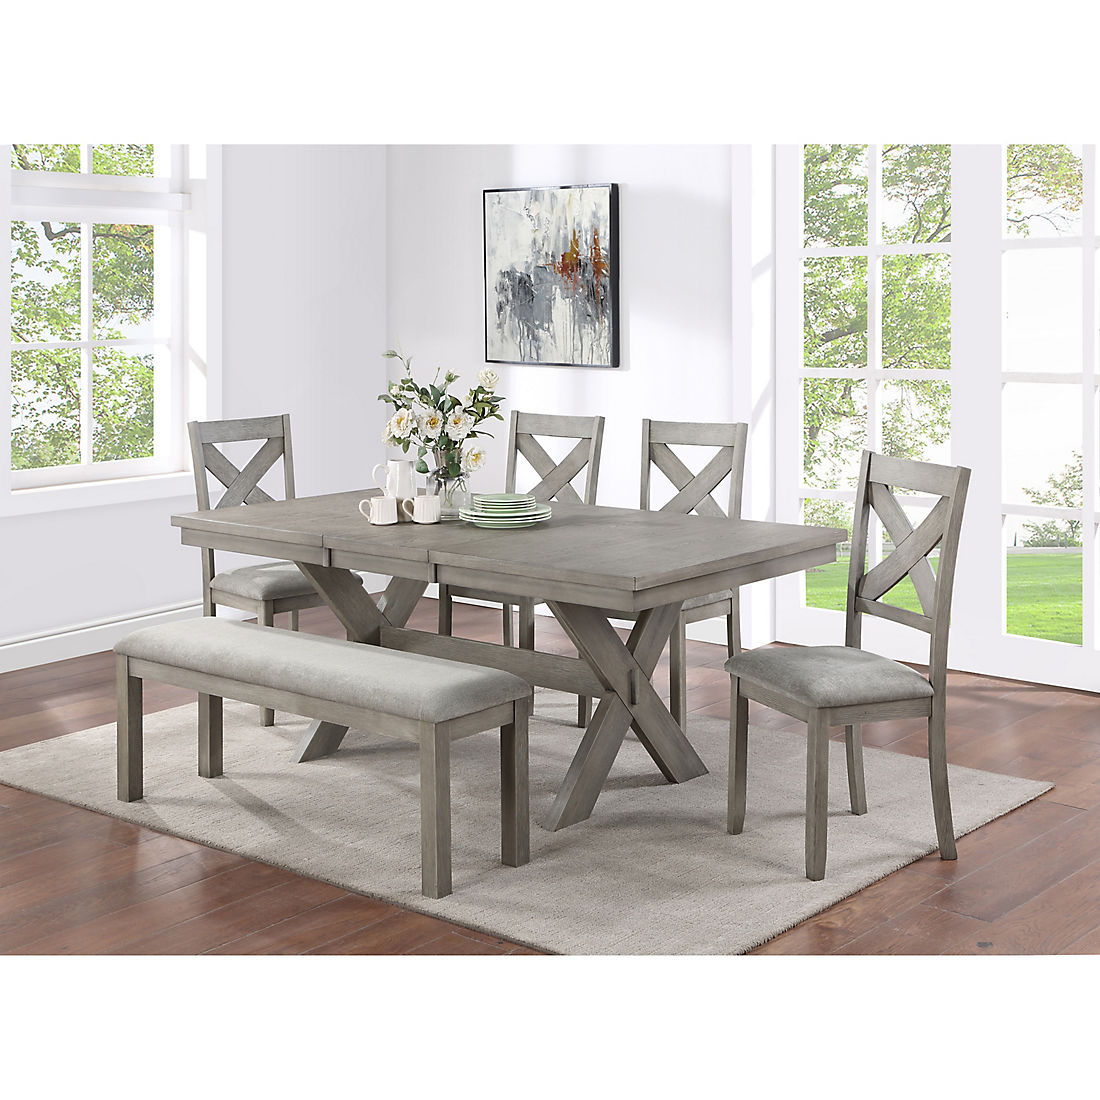 measure take Ruby Home to Office Jackson 6 Pc. Dining Set - Brown - BJs Wholesale Club